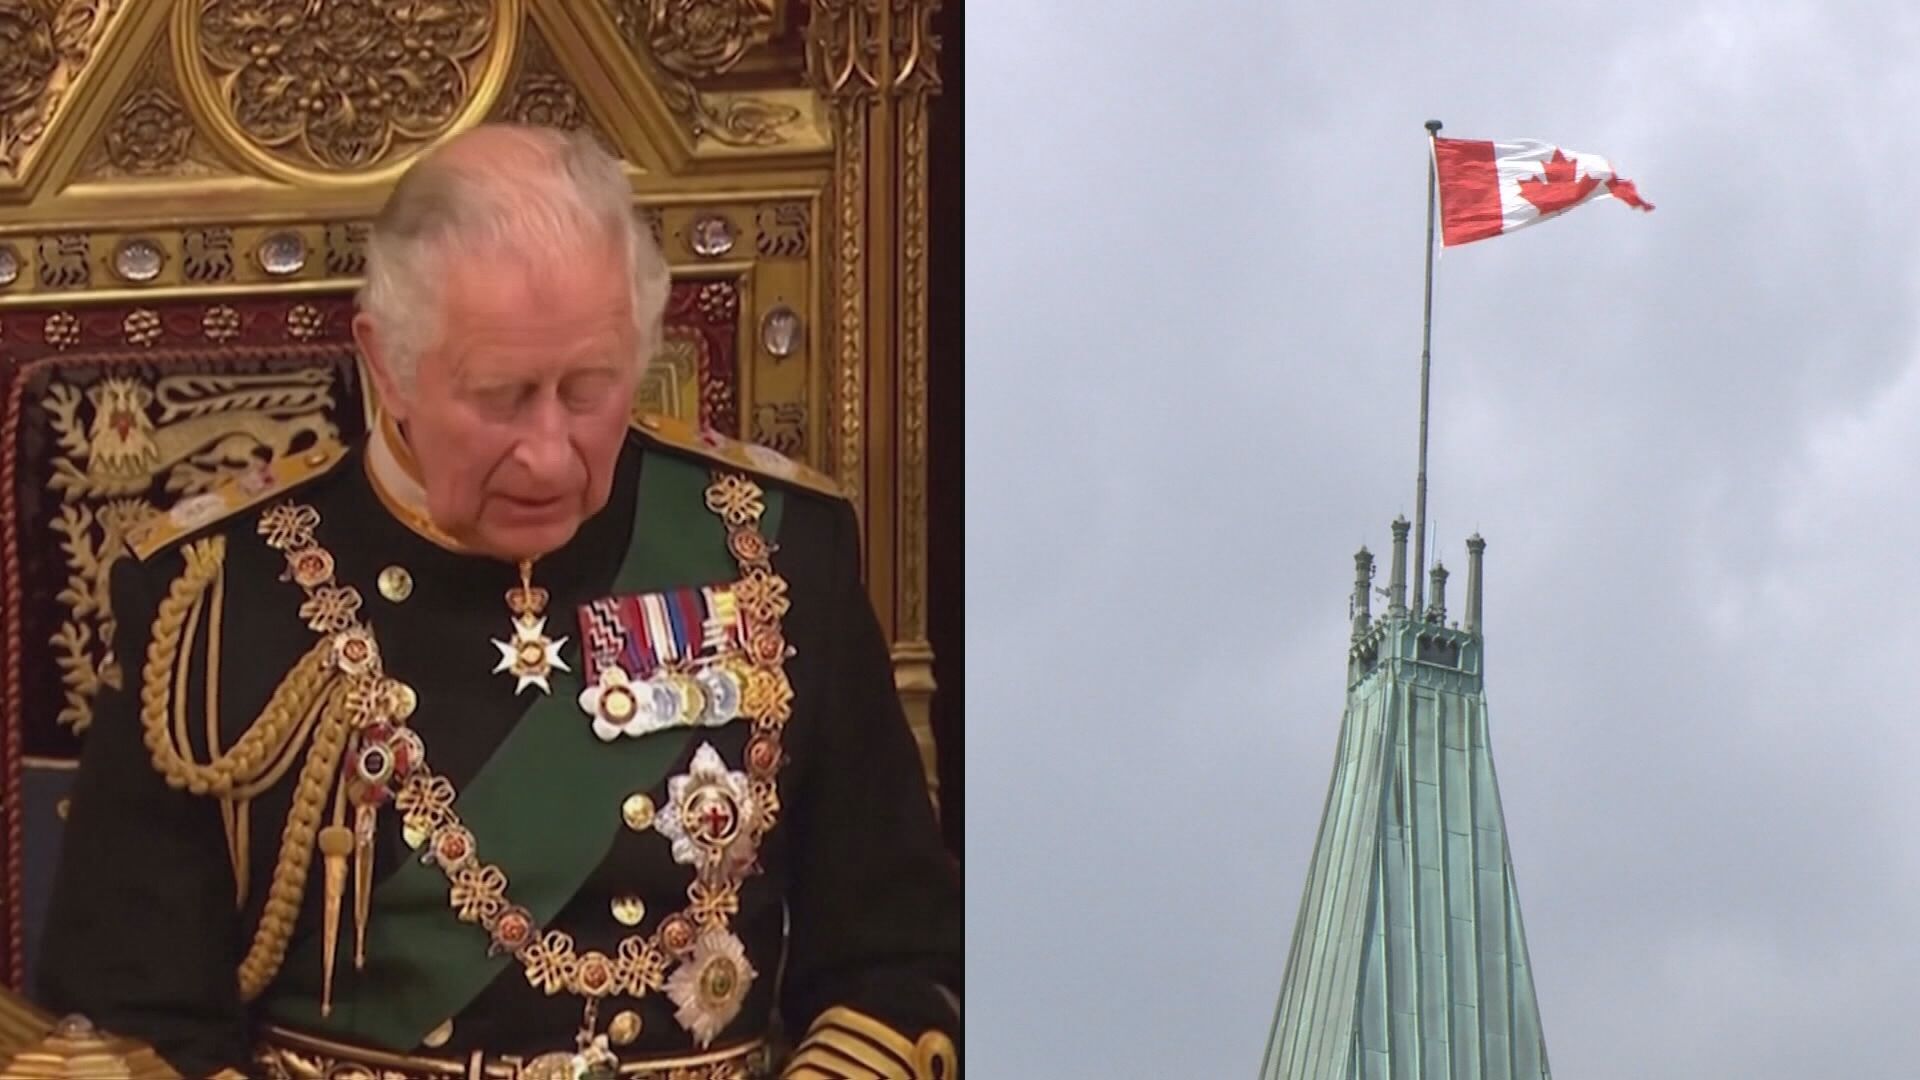 Should MP’s swear allegiance to the King, or to country?